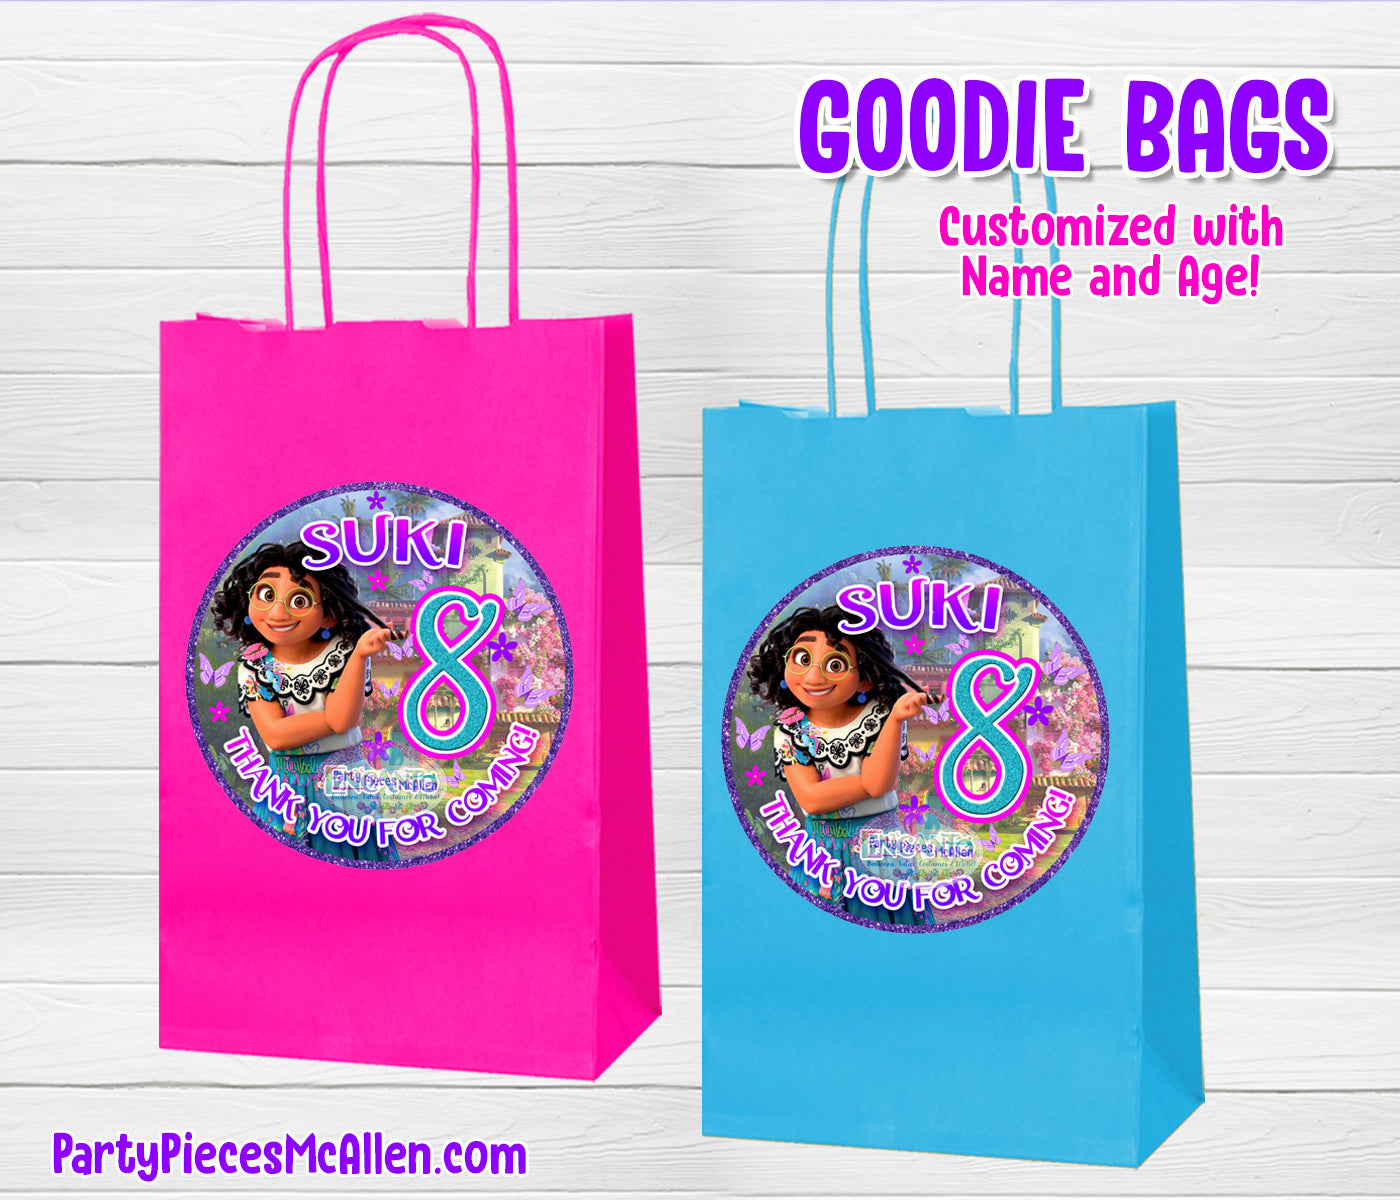 HOW TO MAKE DIY COCOMELON THEMED BIRTHDAY LOOTBAGS TUTORIAL